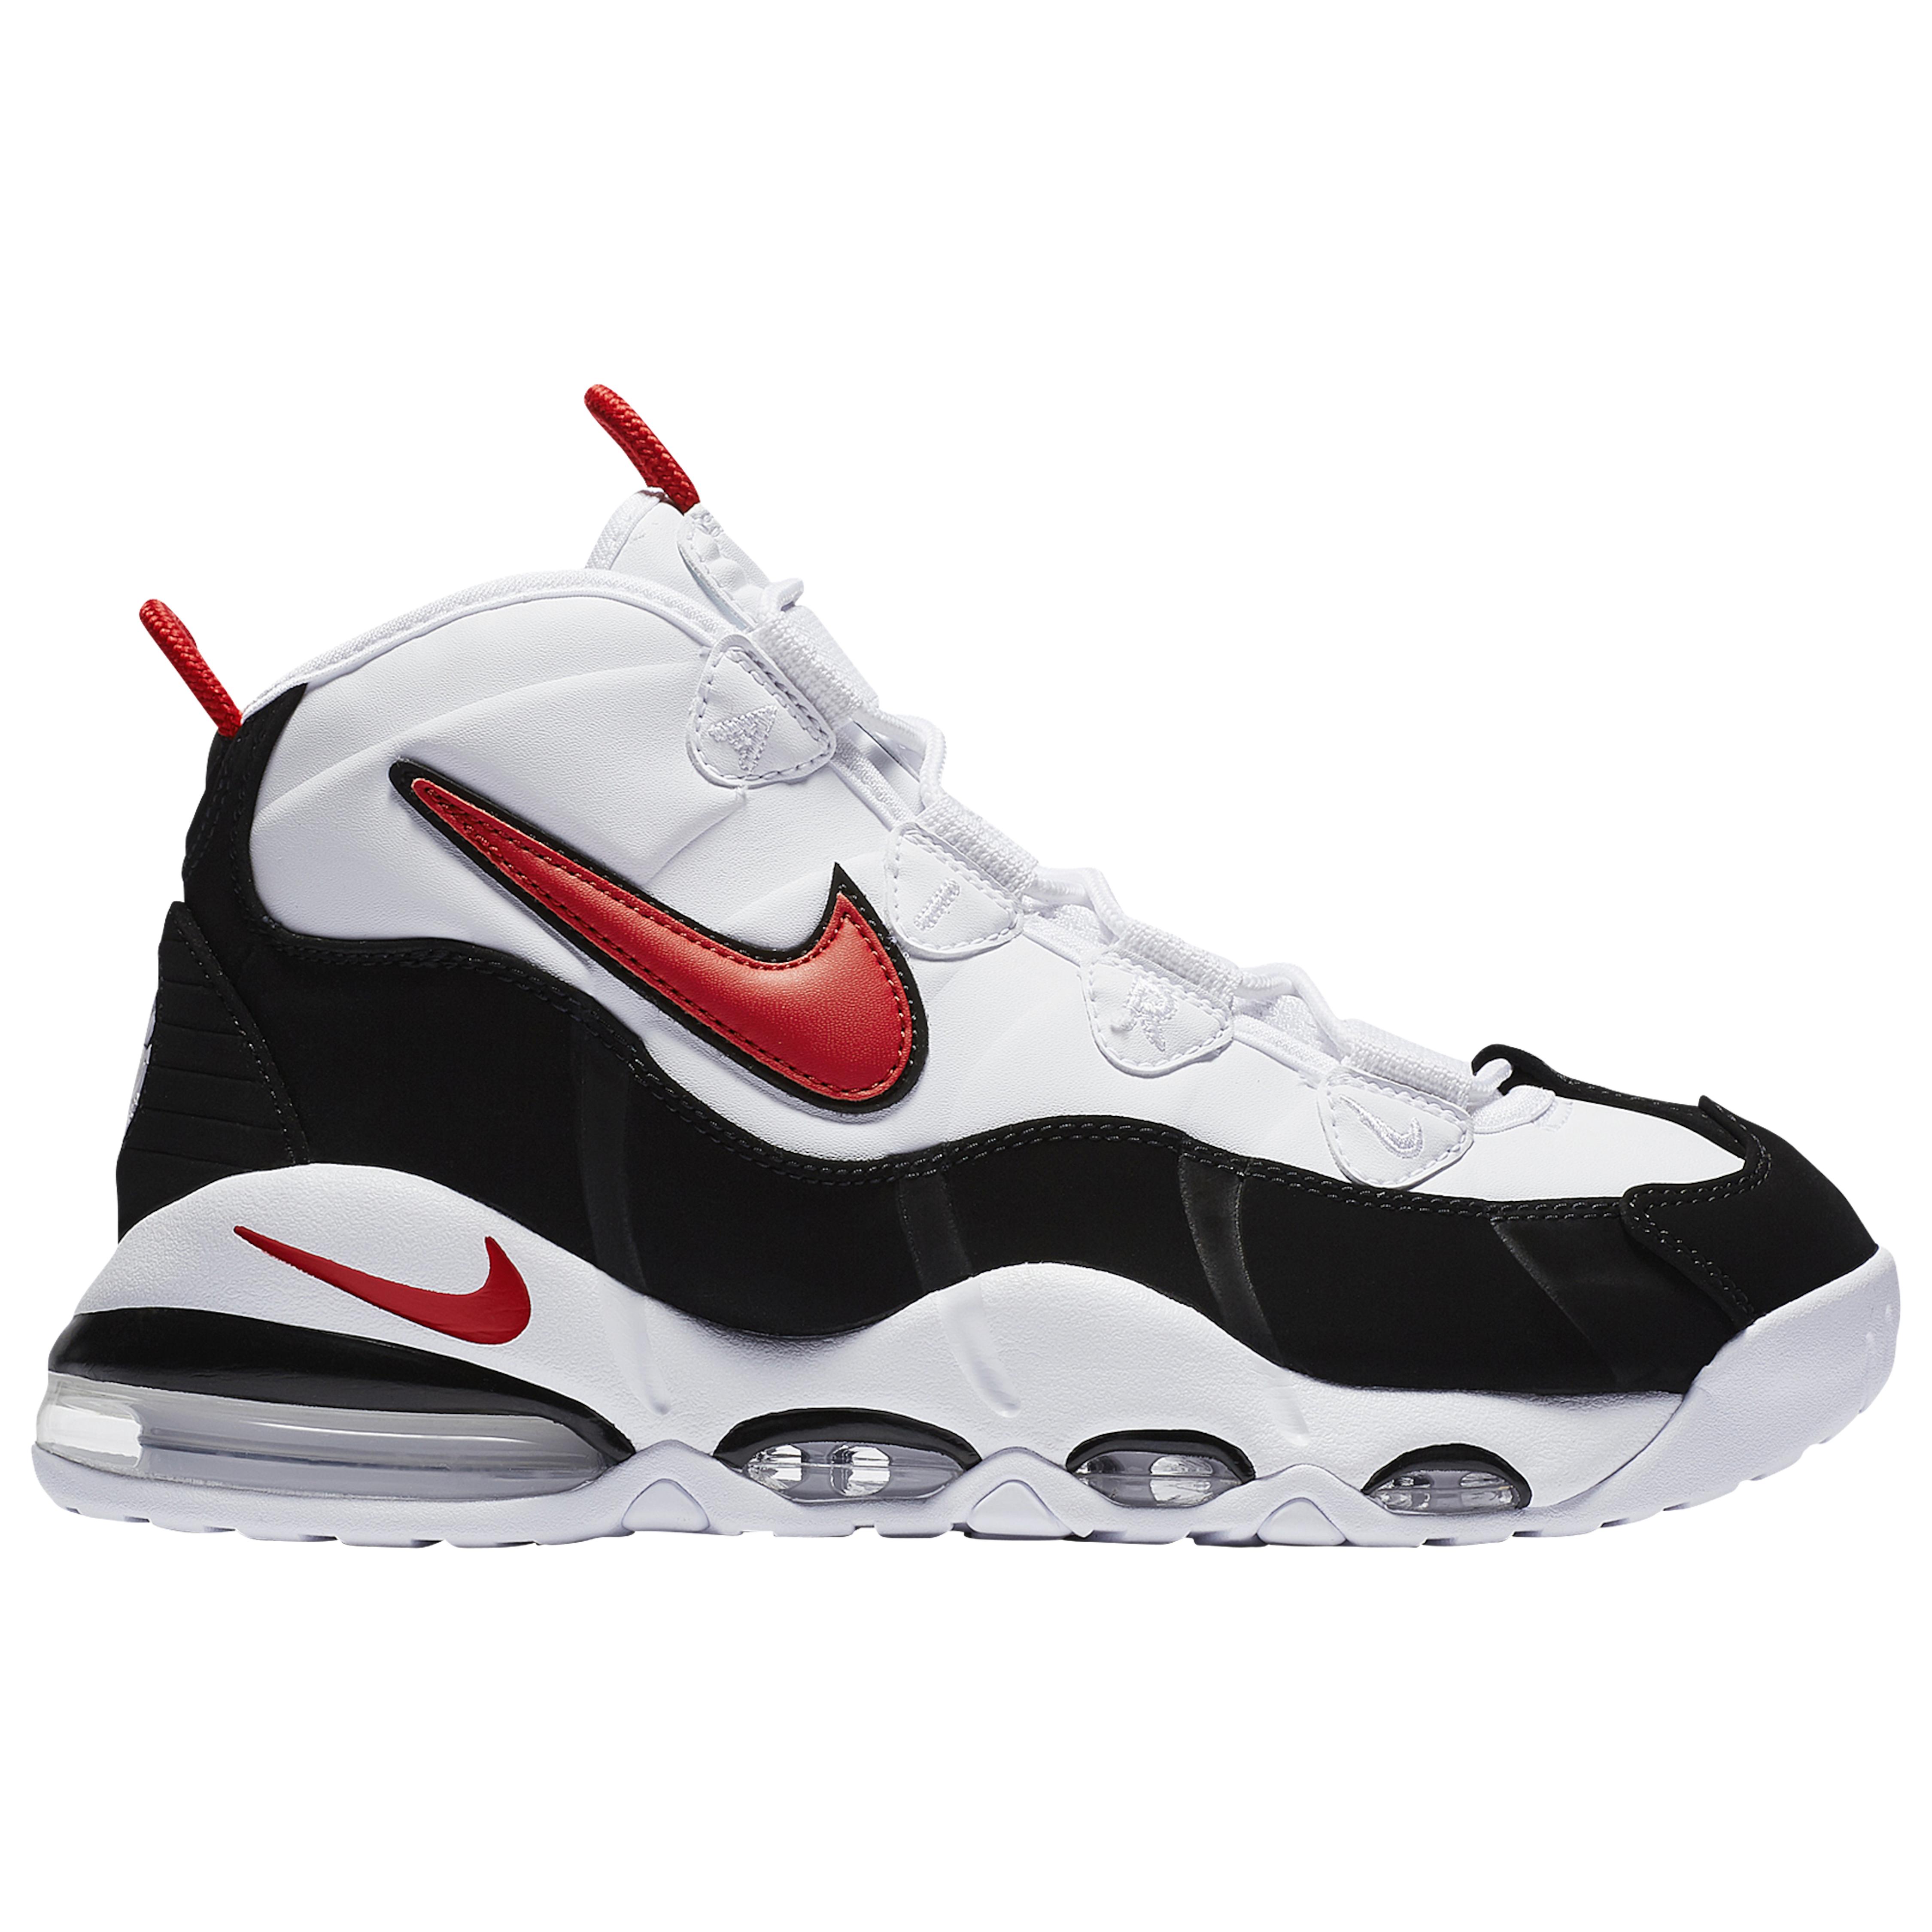 Nike Synthetic Air Max Uptempo '95 in 